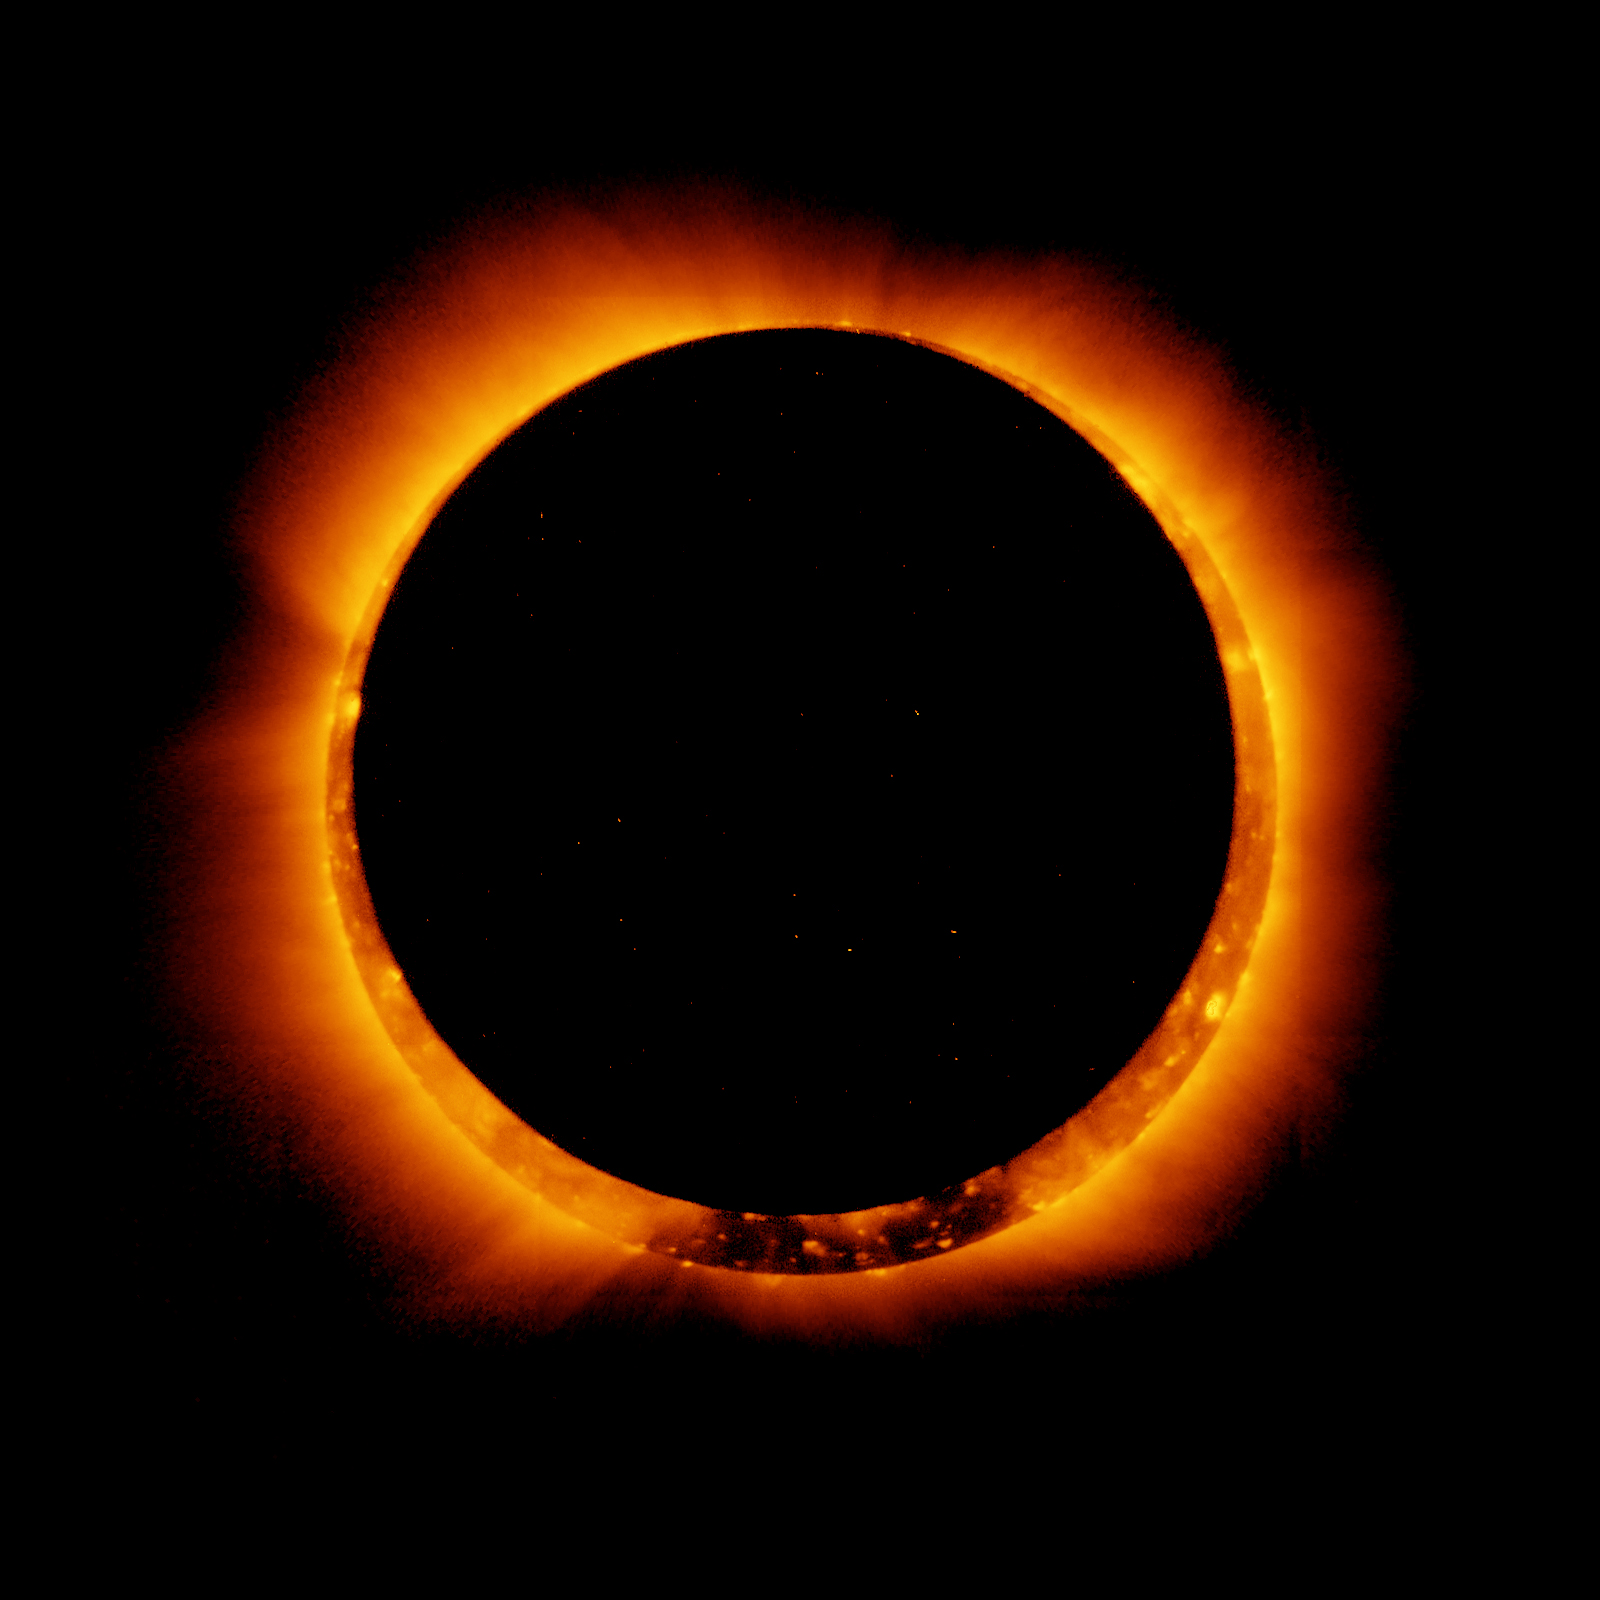 An annular, not total, solar eclipse as captured by the Hinode solar mission. Photo courtesy NASA Goddard Space Flight Center.